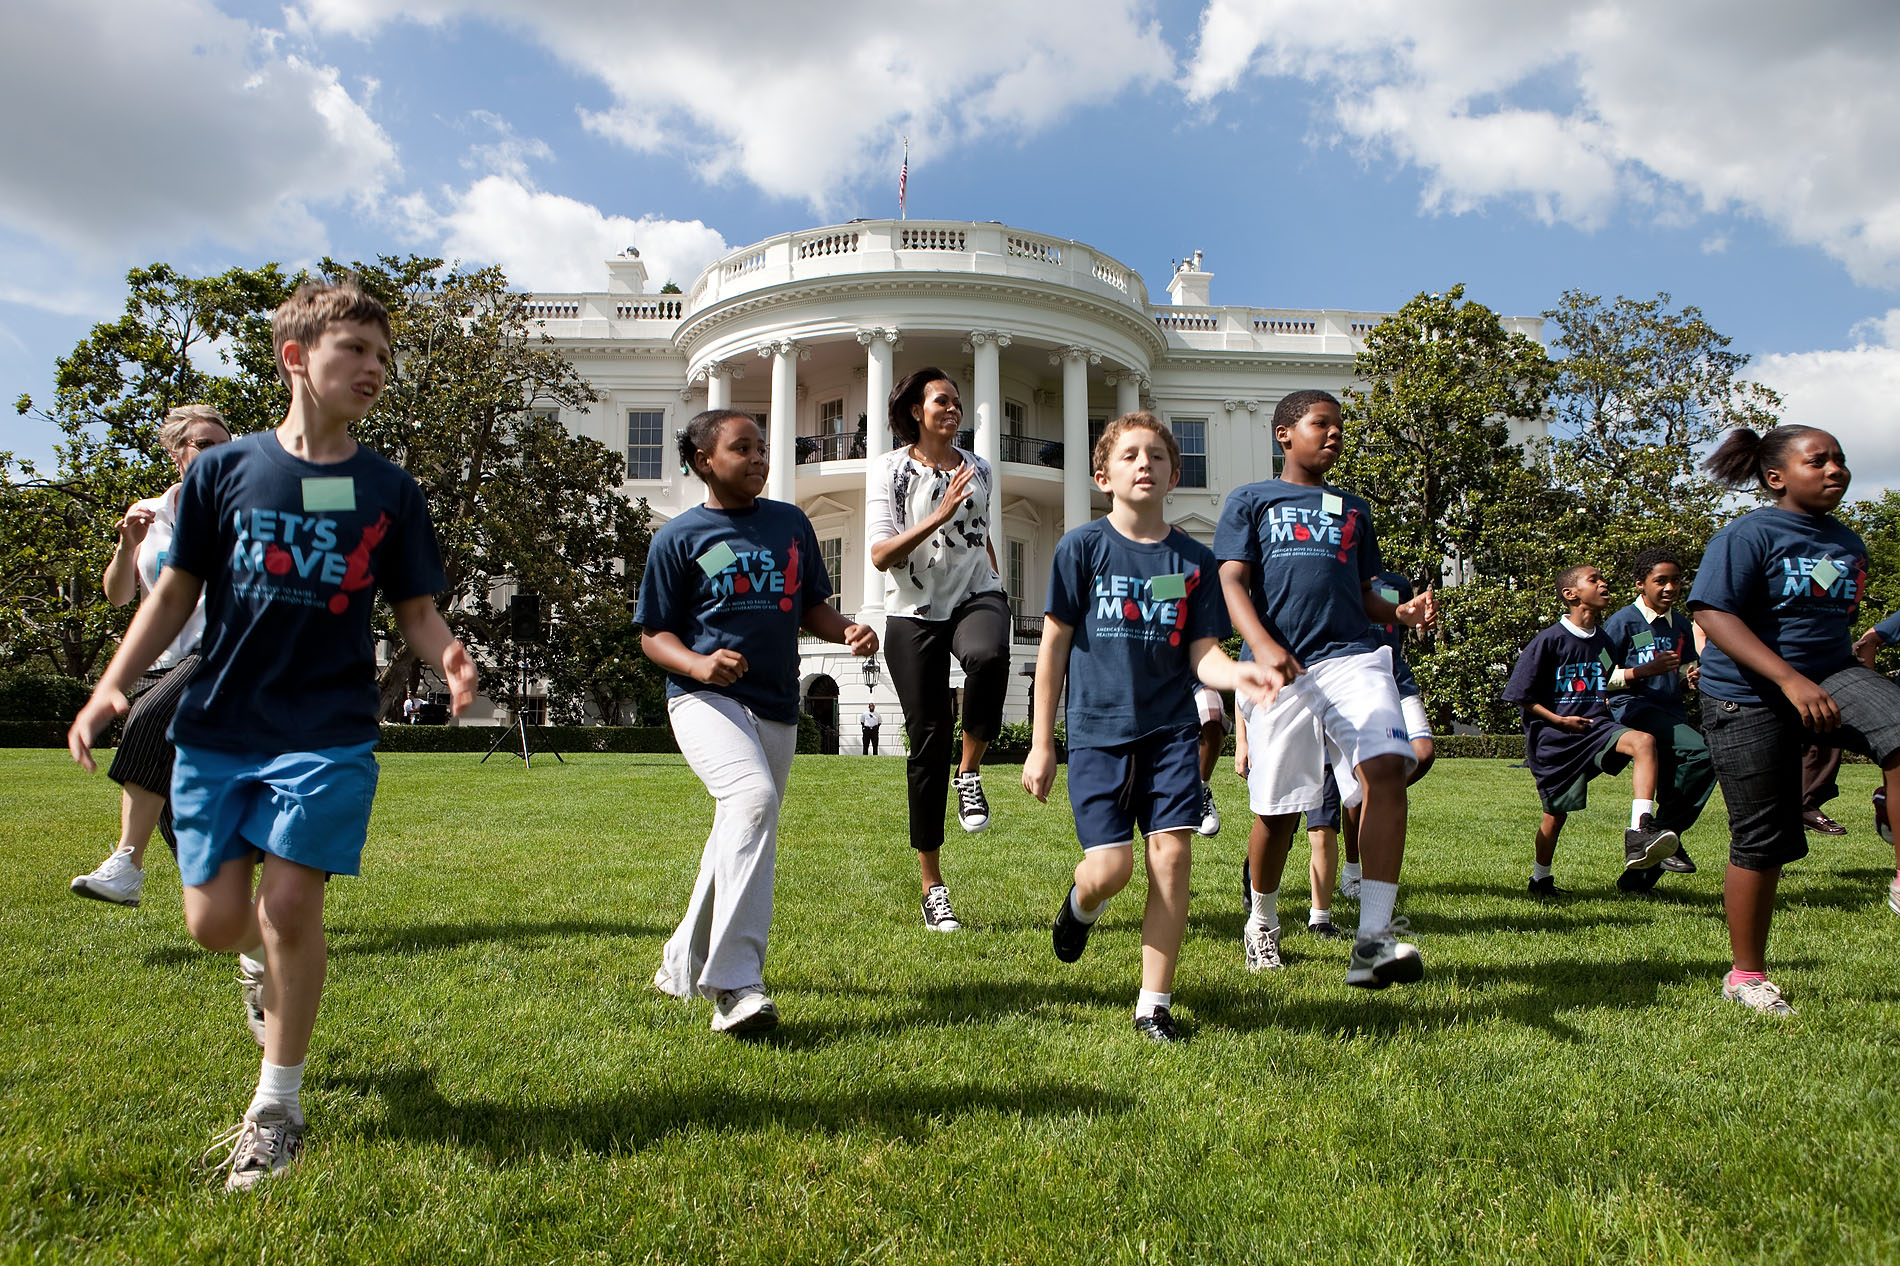 Let’s Move! series kick-off on the South Lawn with First Lady Michelle Obama